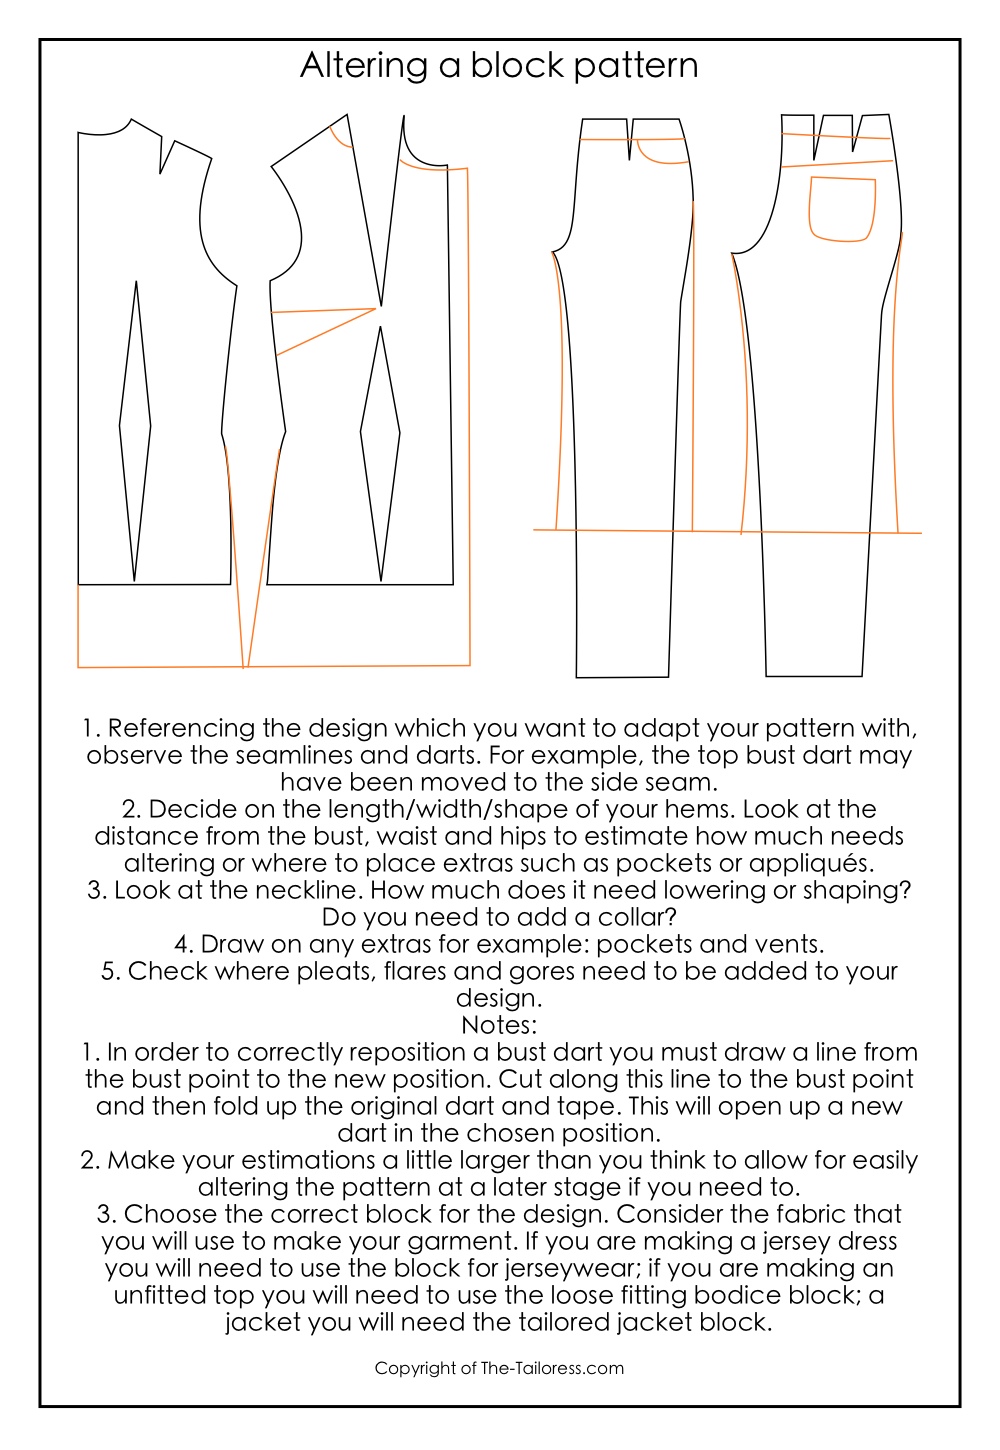 Guide to altering a block pattern for a custom design - The Tailoress PDF Sewing Patterns